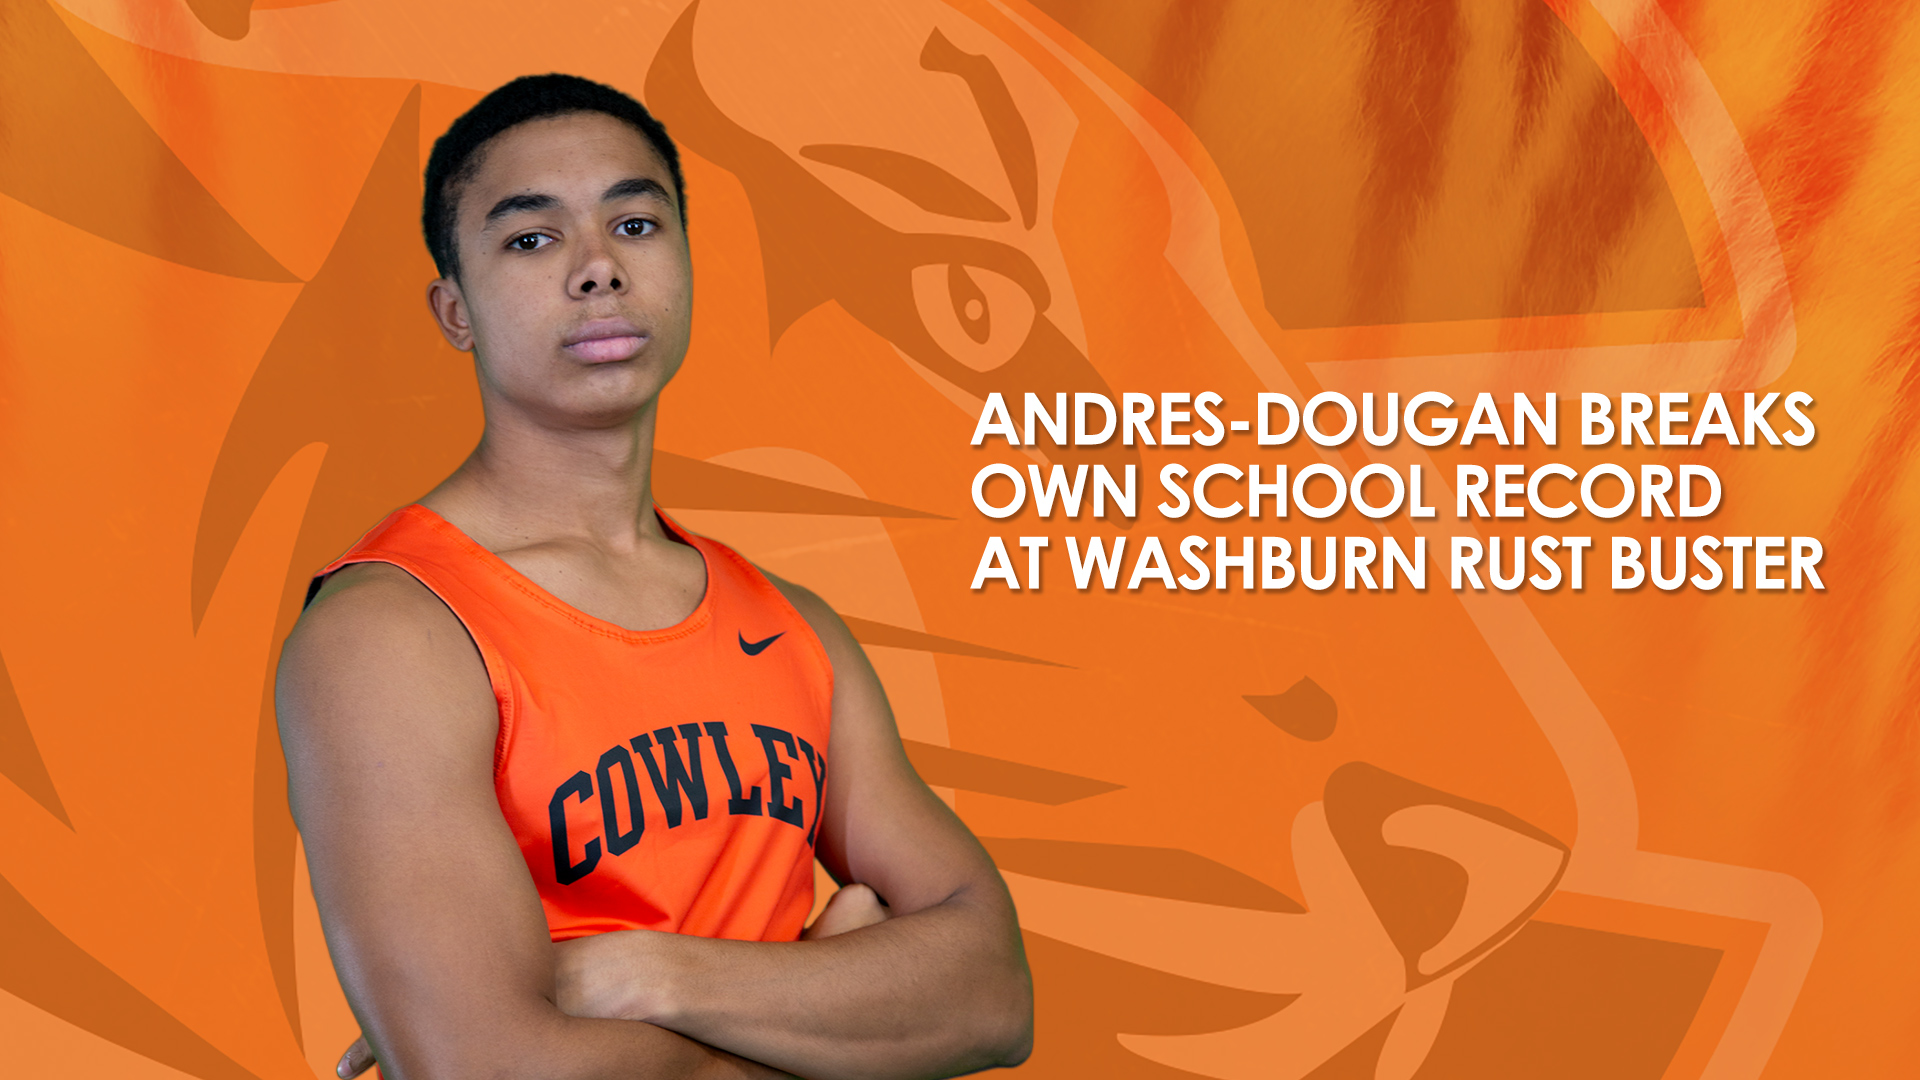 Andres-Dougan breaks own school record at Washburn Rust Buster